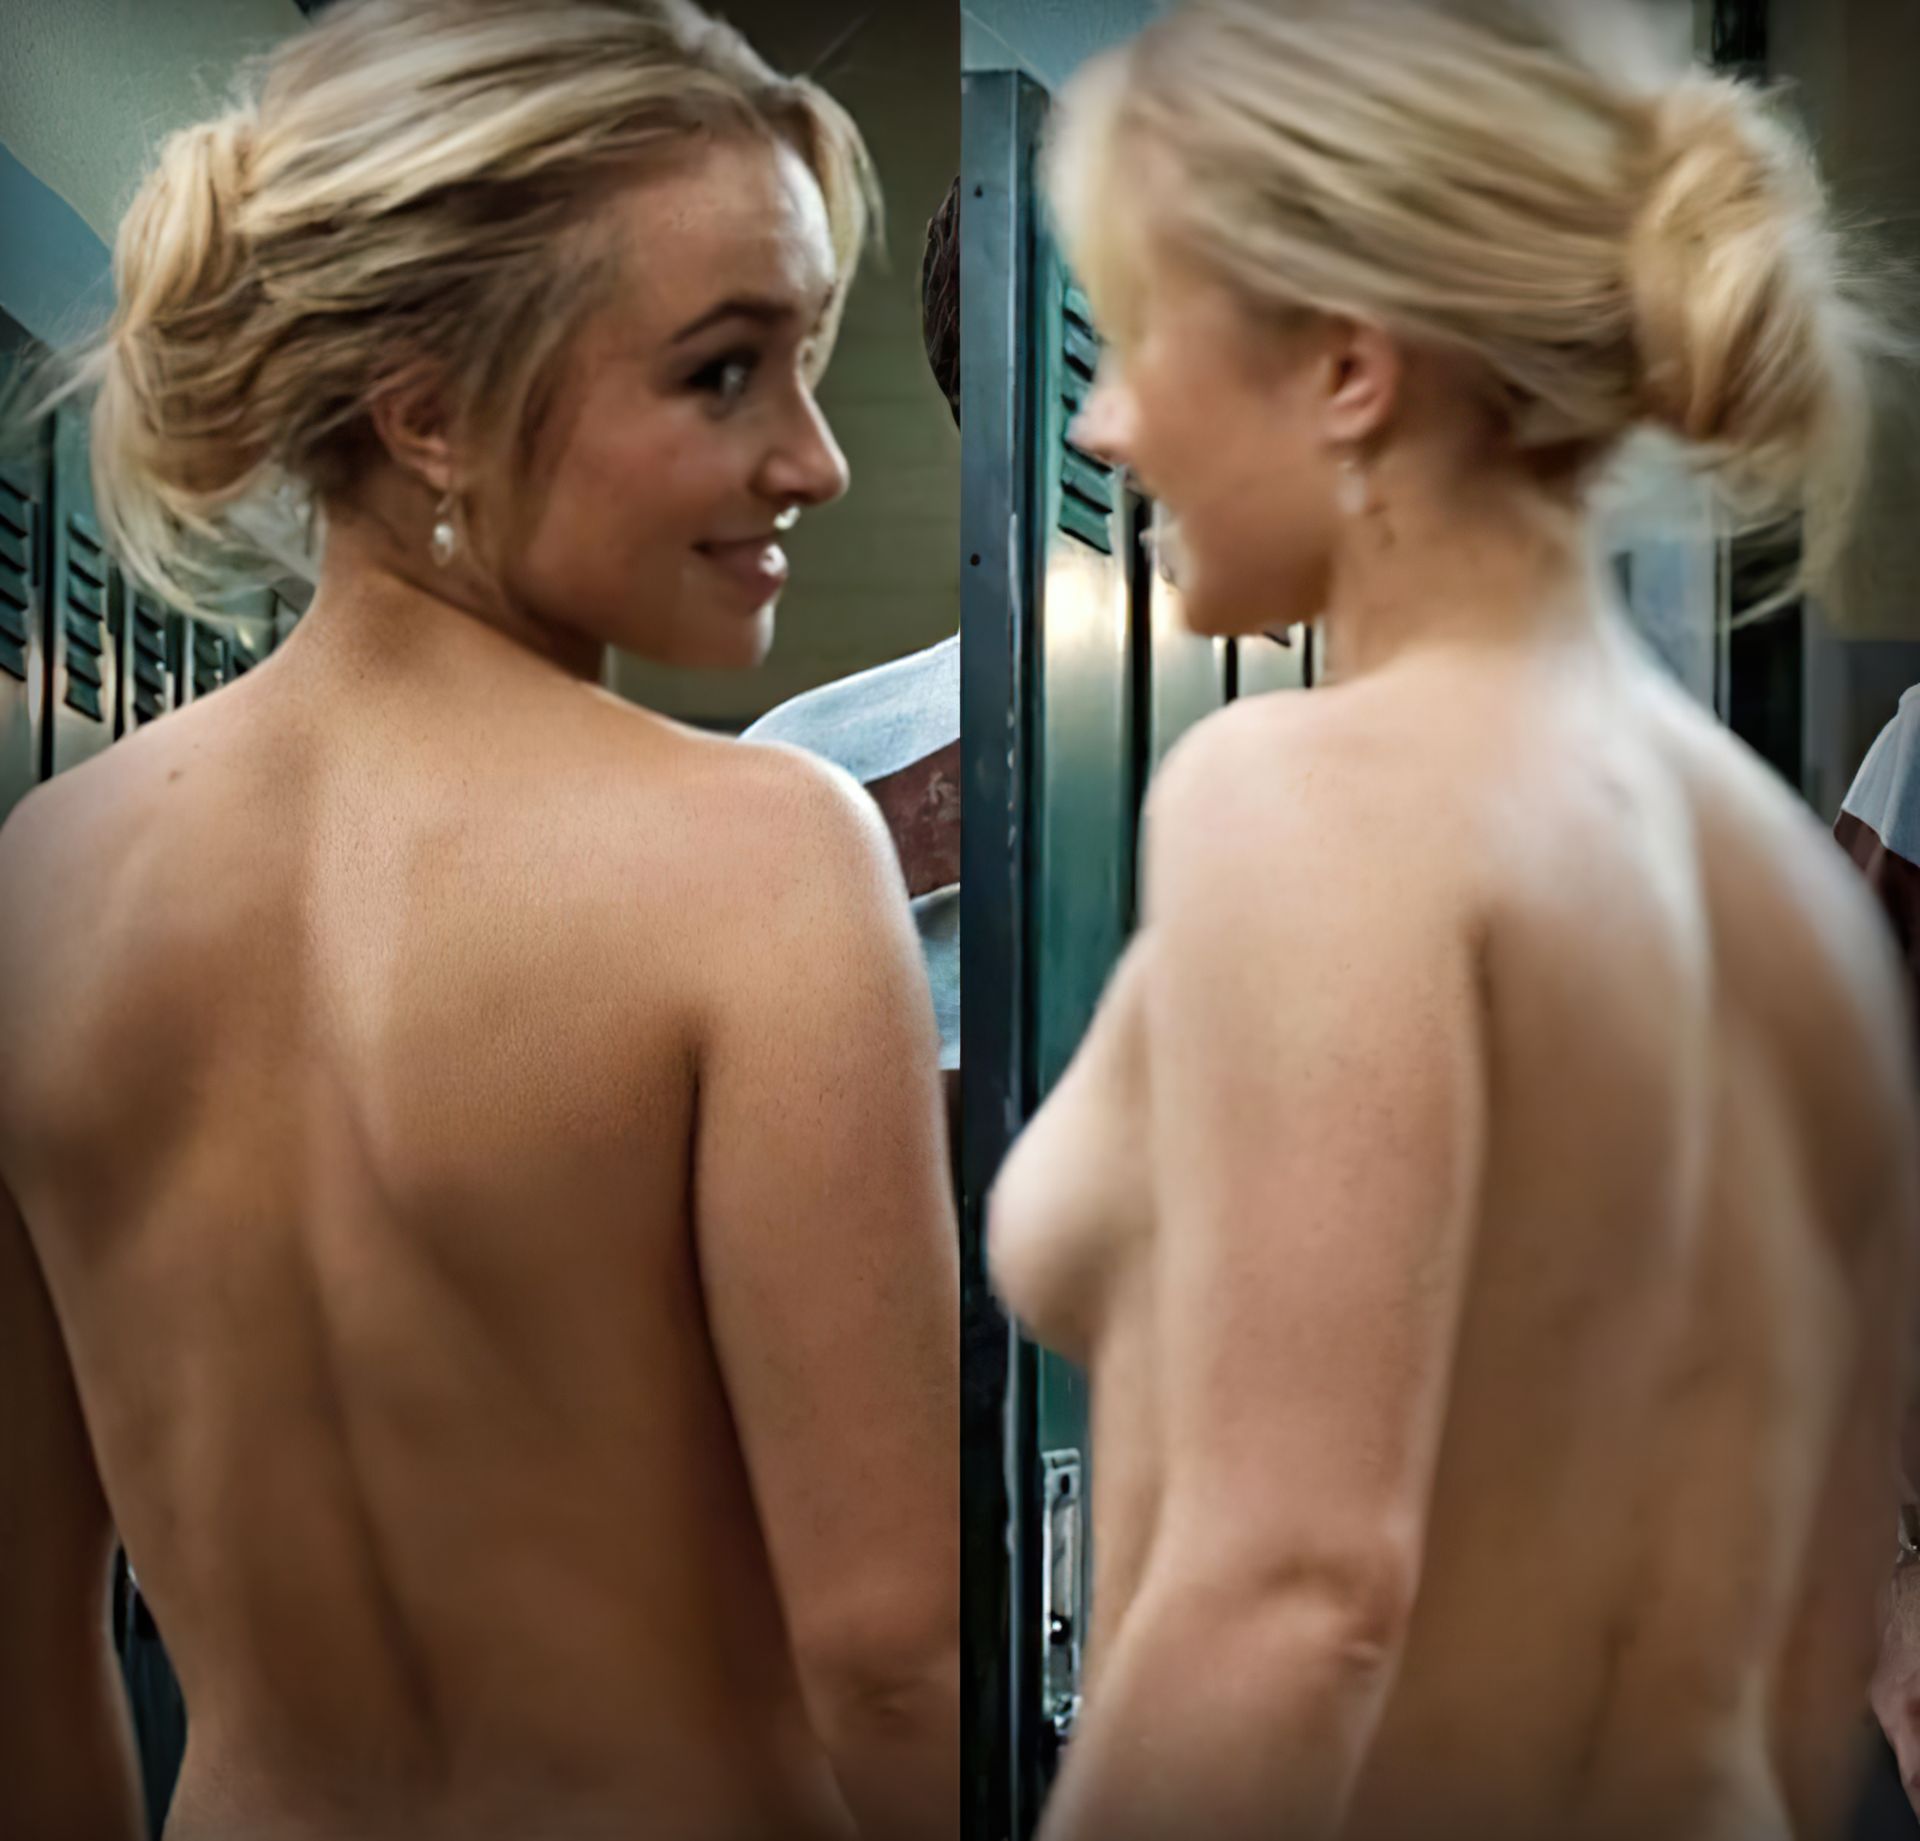 Here is Hayden Panettiere’s slightly nude collage photo from. 